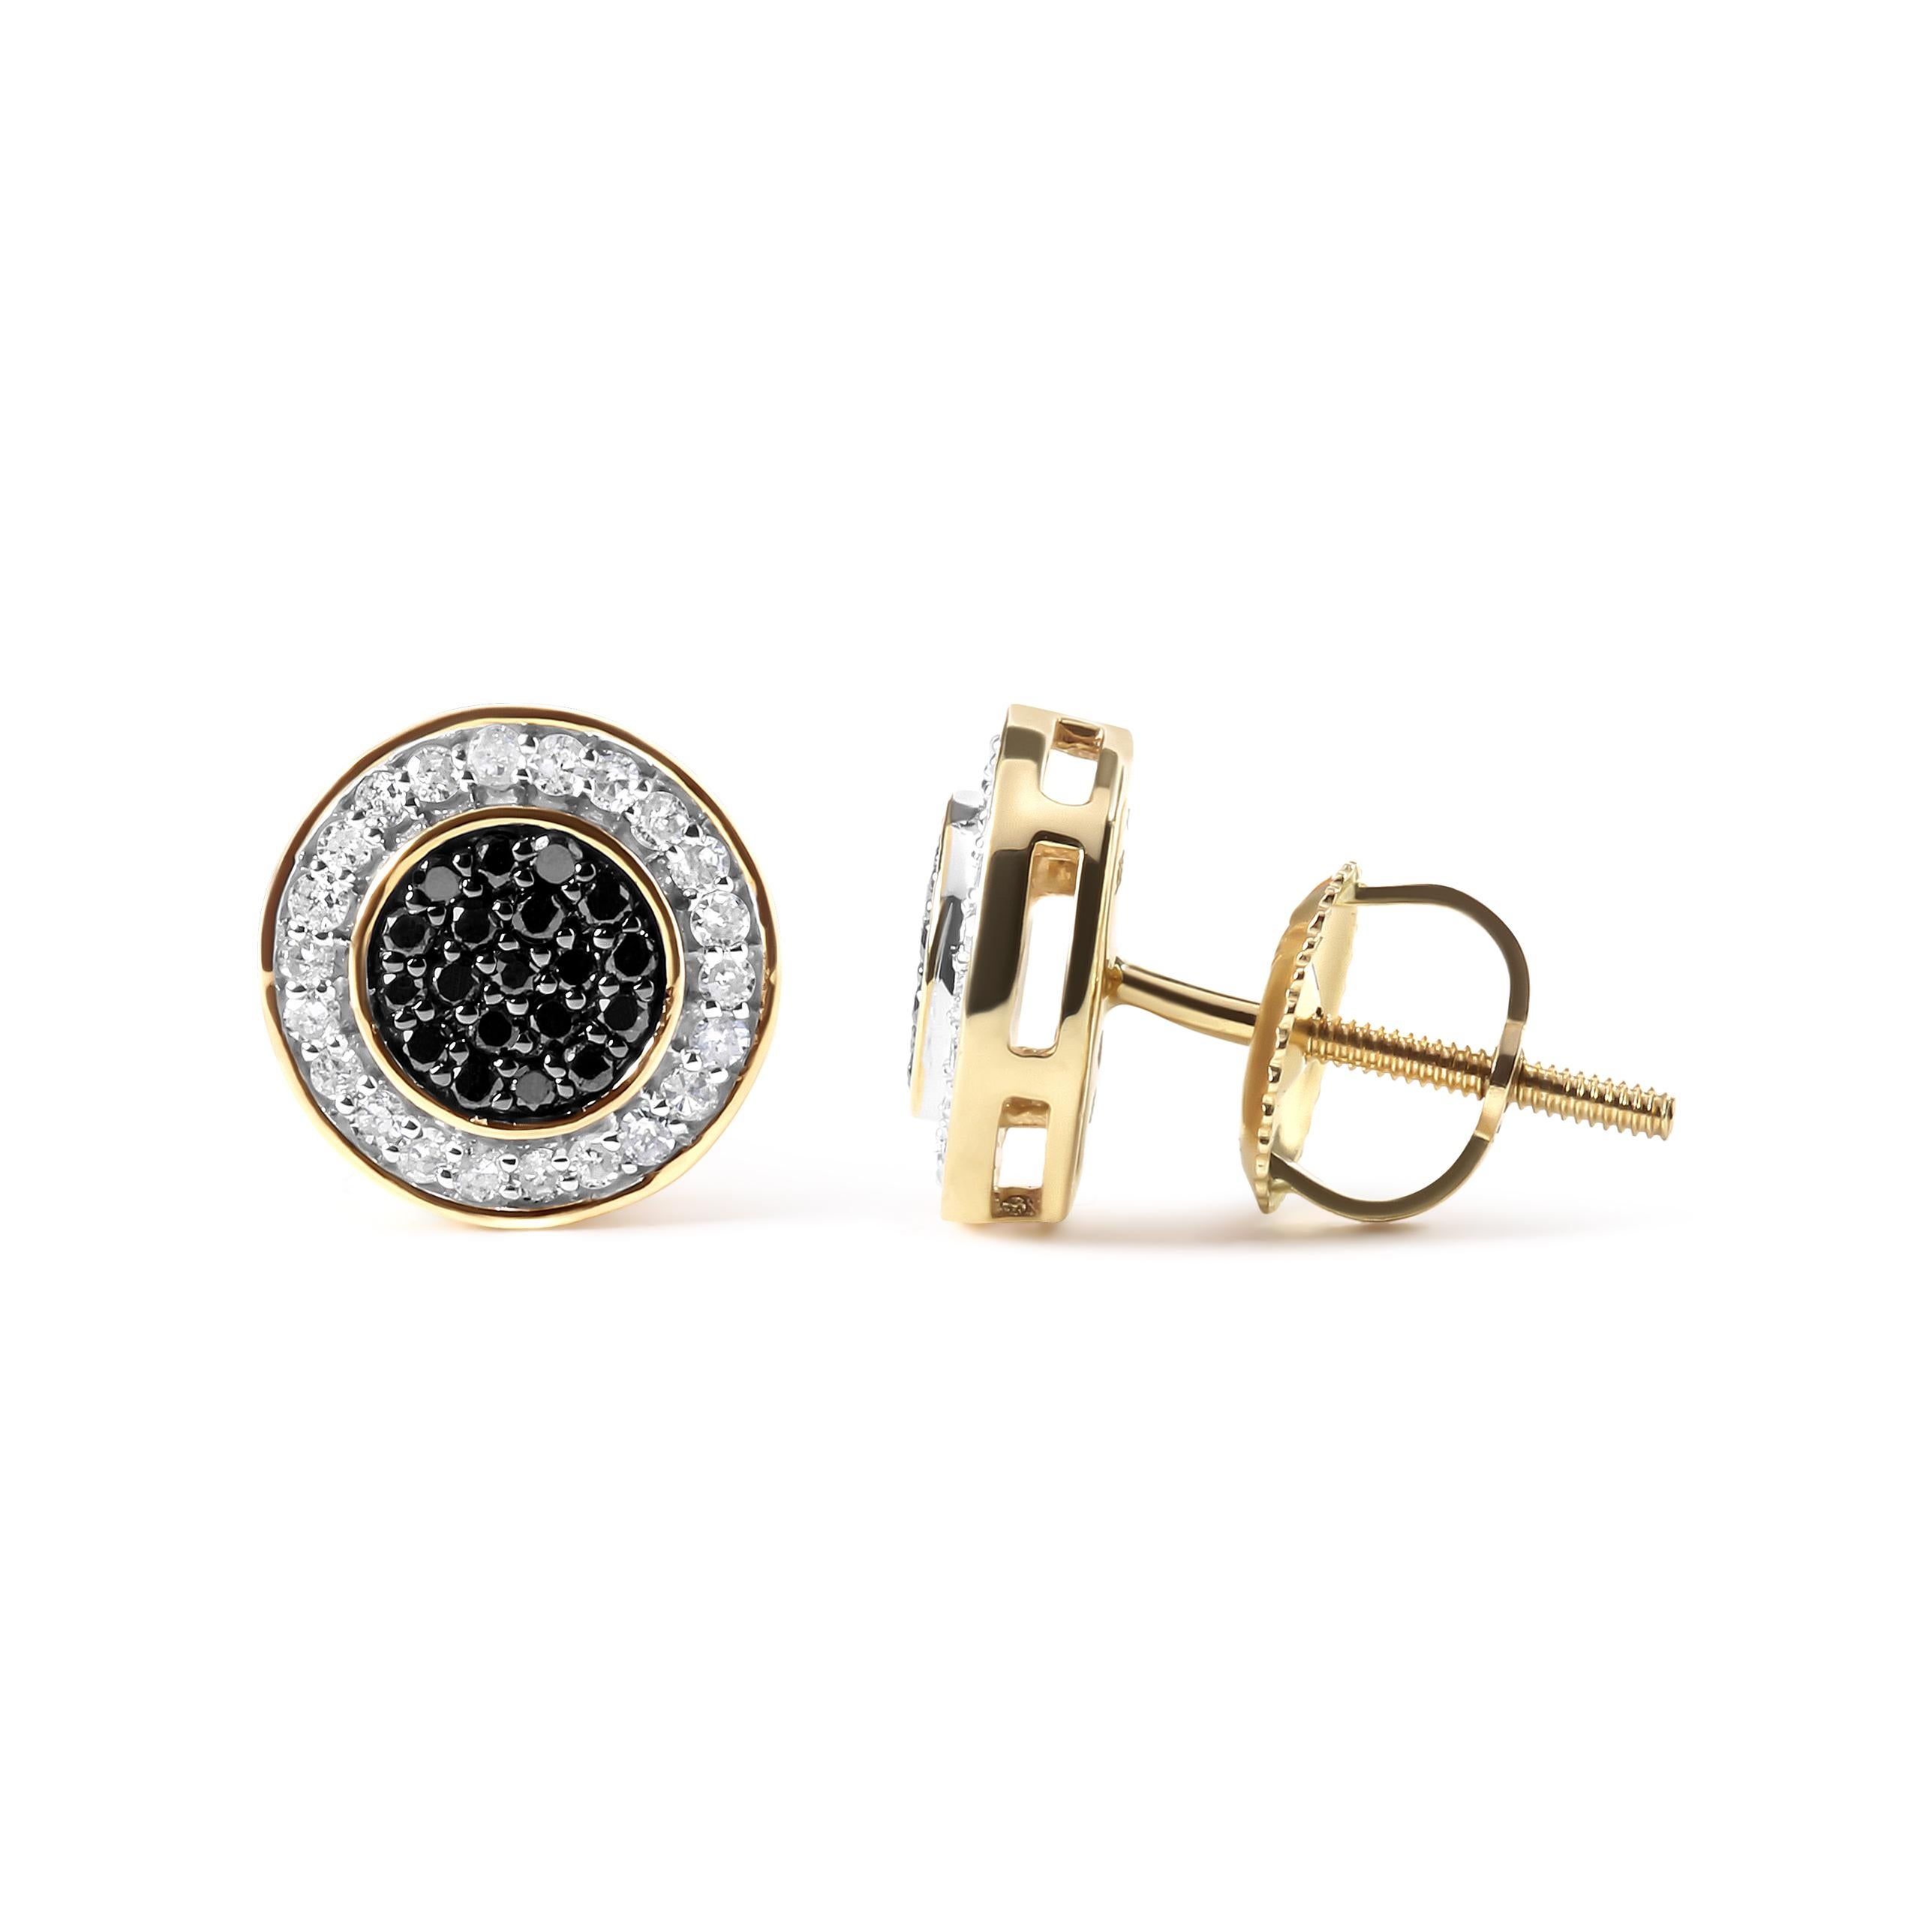 Contemporary Men's 10K Yellow Gold 1/3 Carat White and Black Treated Diamond Earring